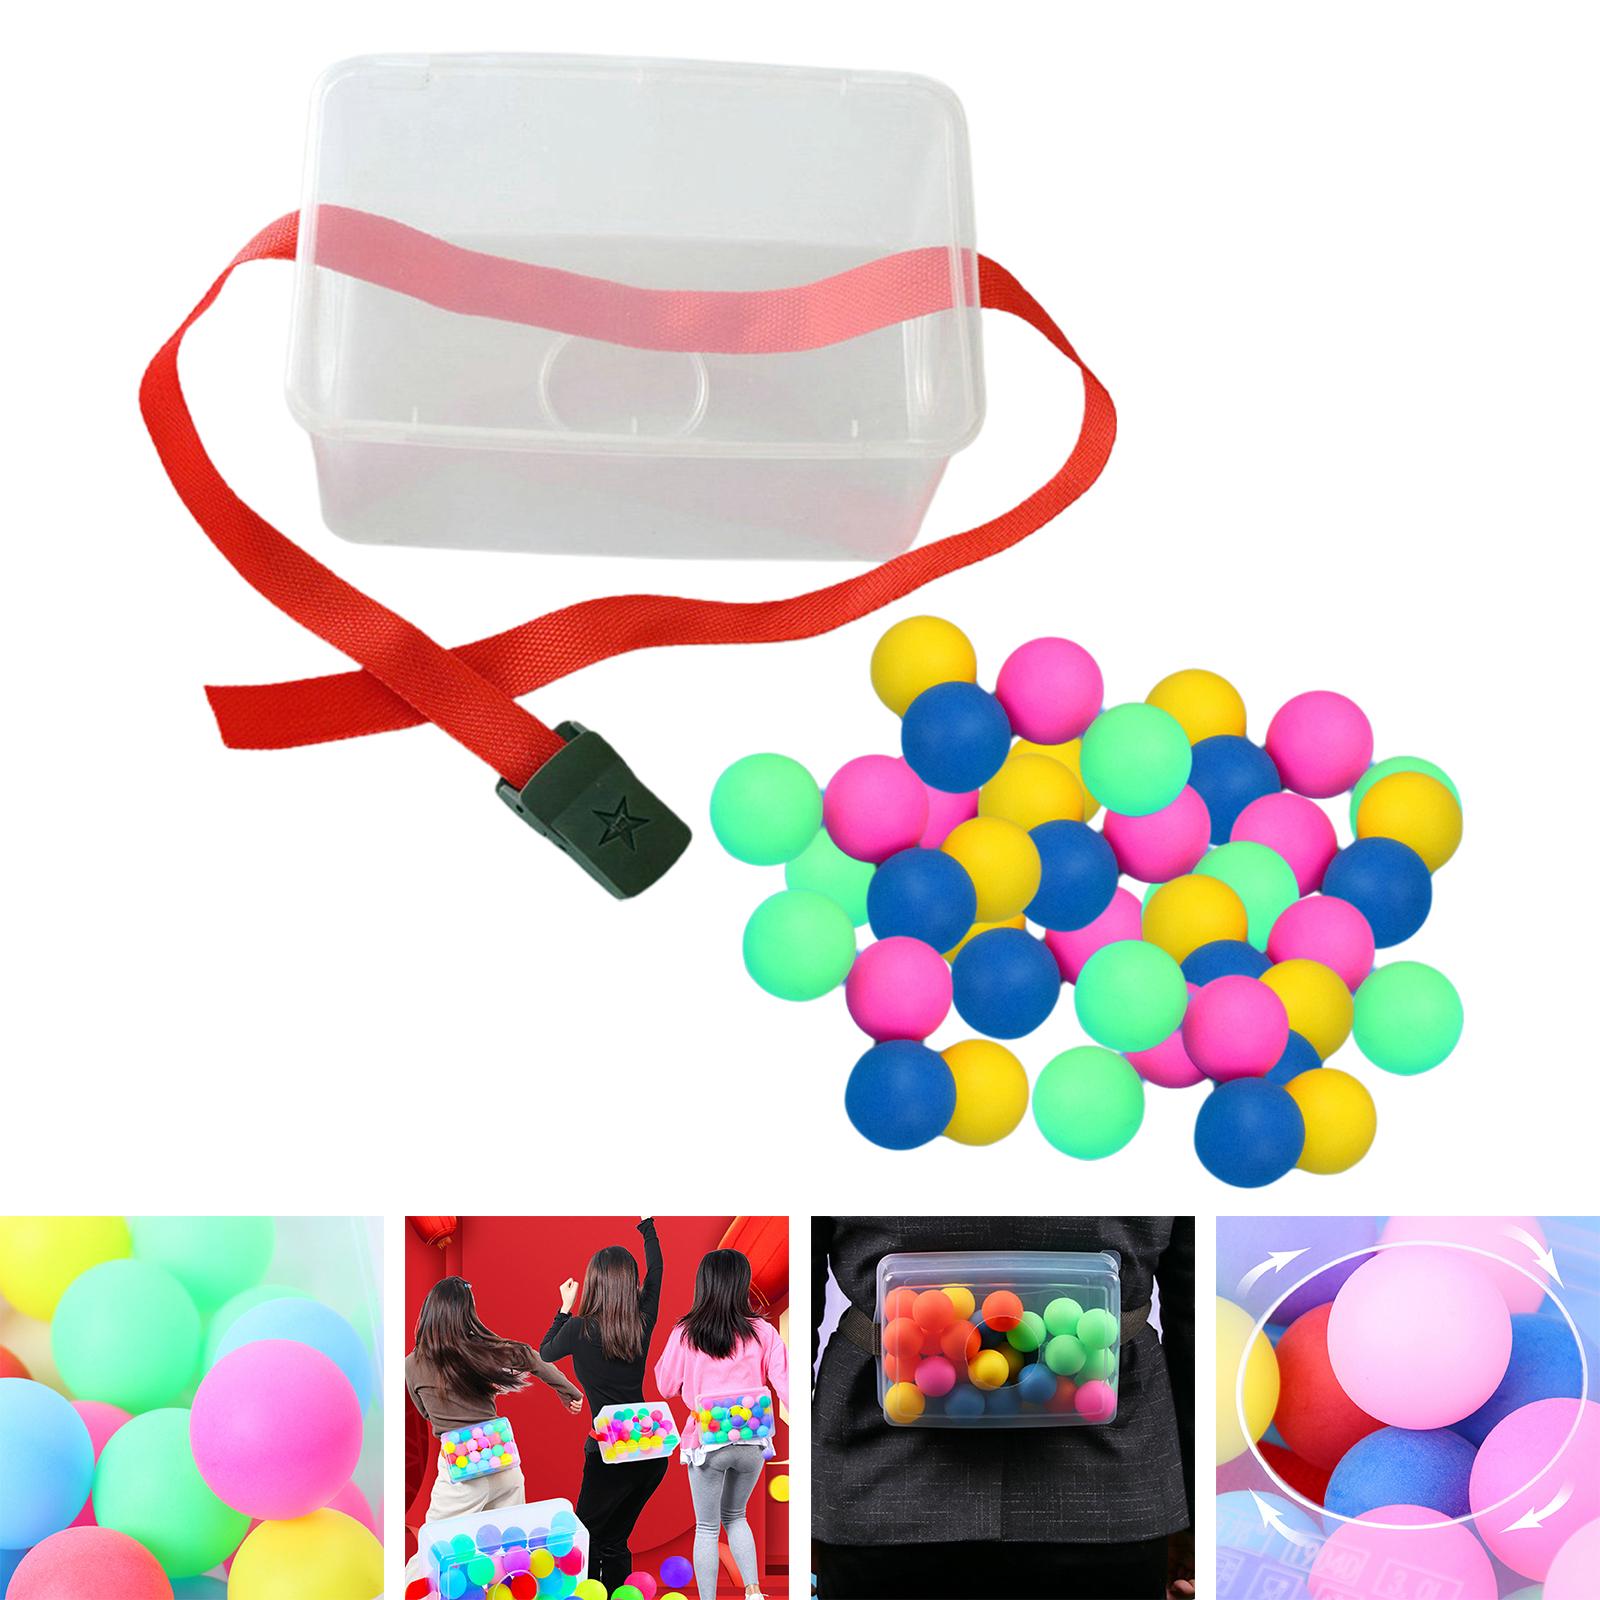 Baoblaze Shaking Swing Balls Game Competition Toy Carnival Games Party